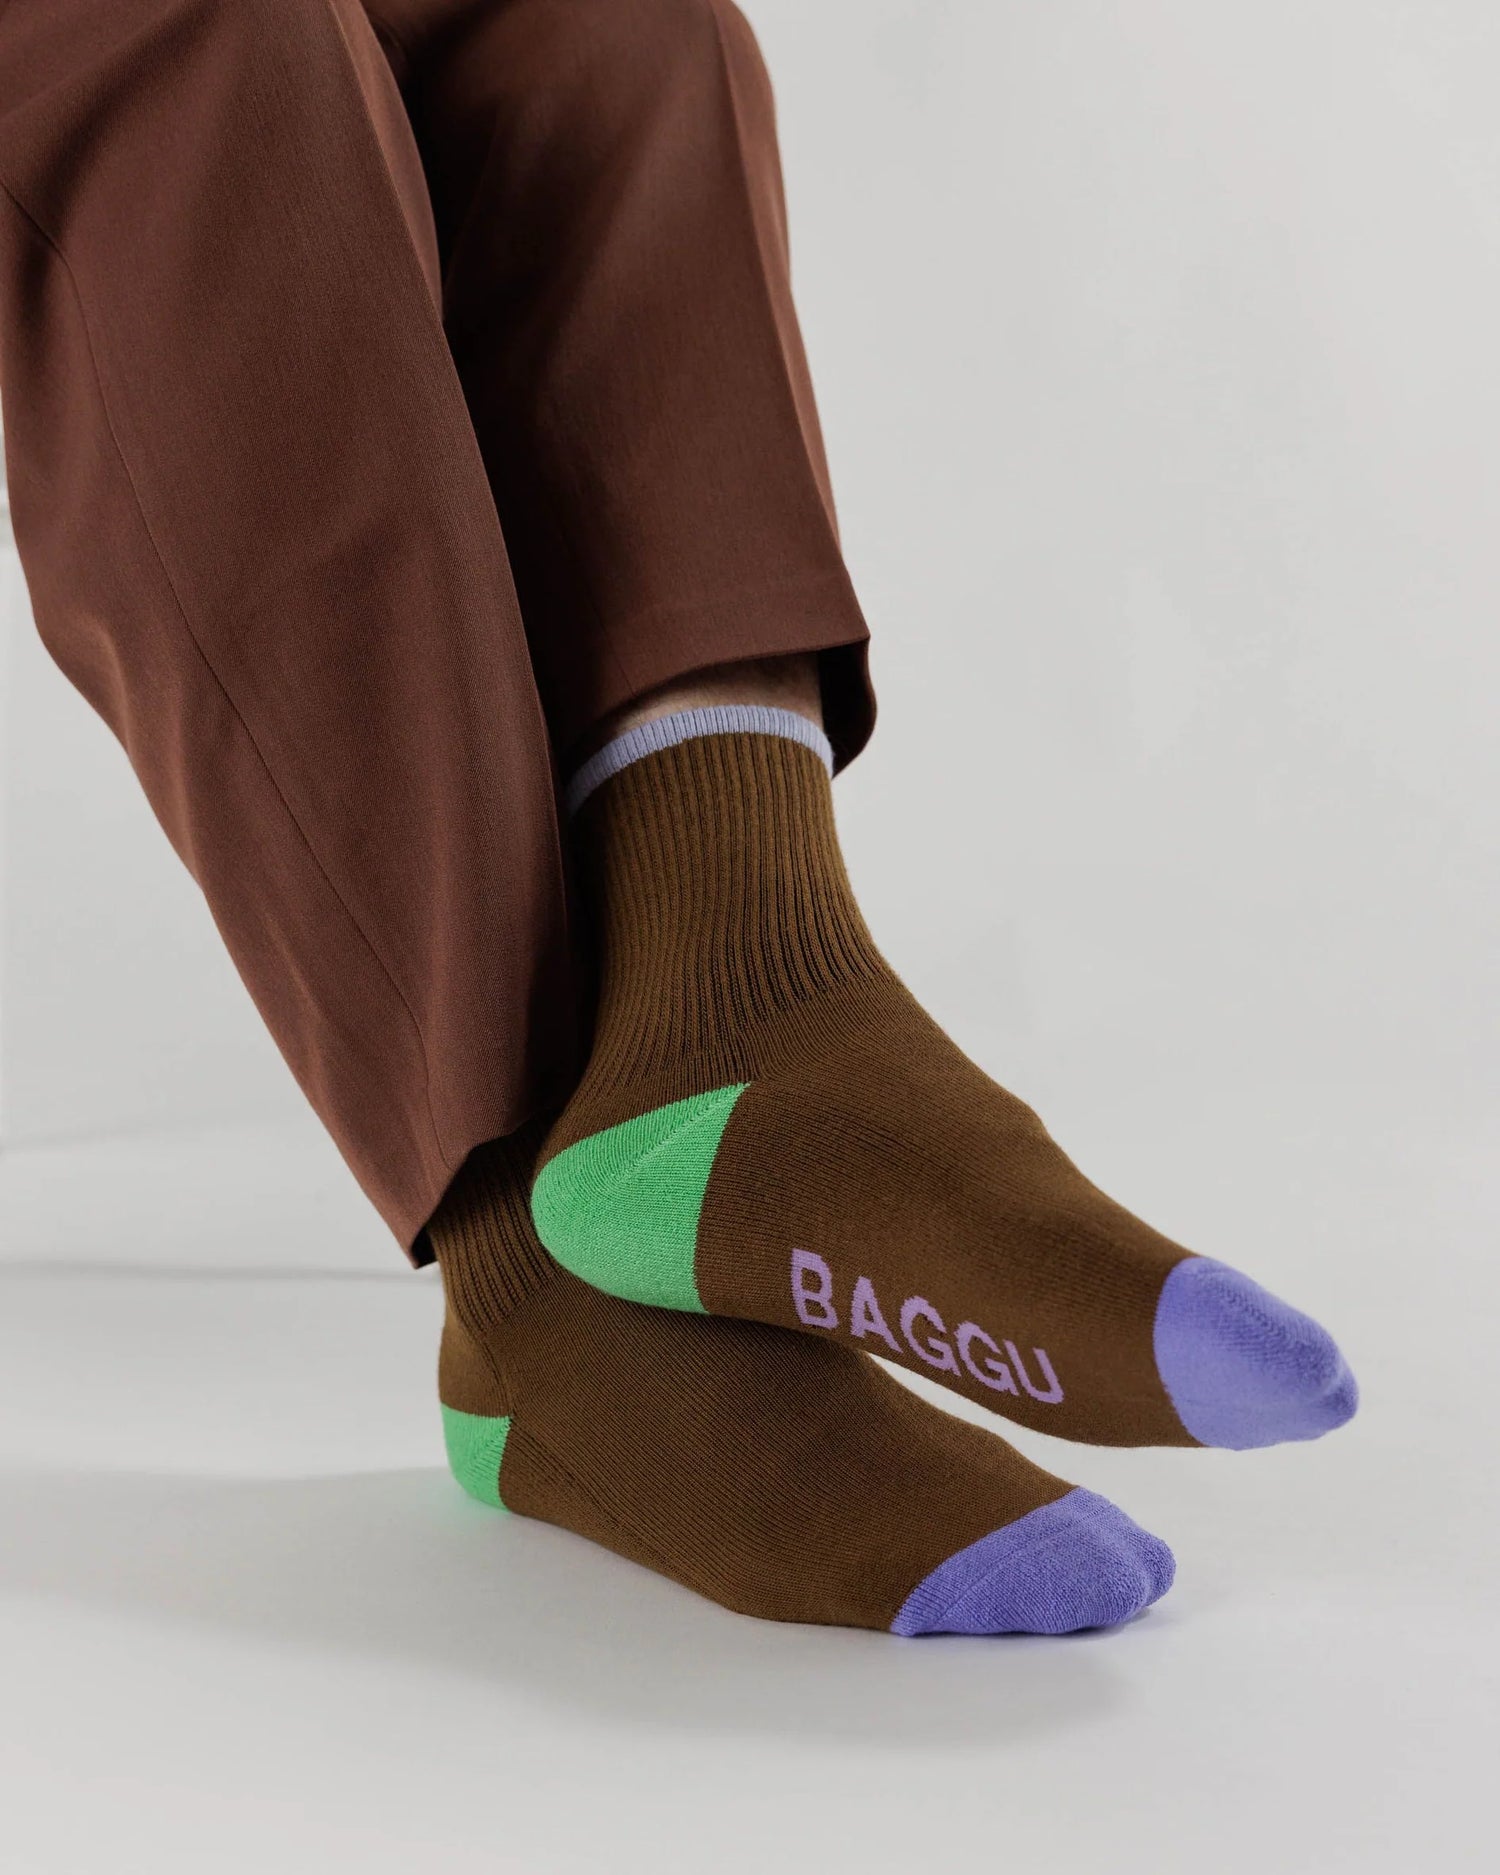 Brown Socks with Lilac Ankle Stripe, Green heel, Radiant Purple colour blocked toes, dusty pink "BAGGU" text on bottom of feet